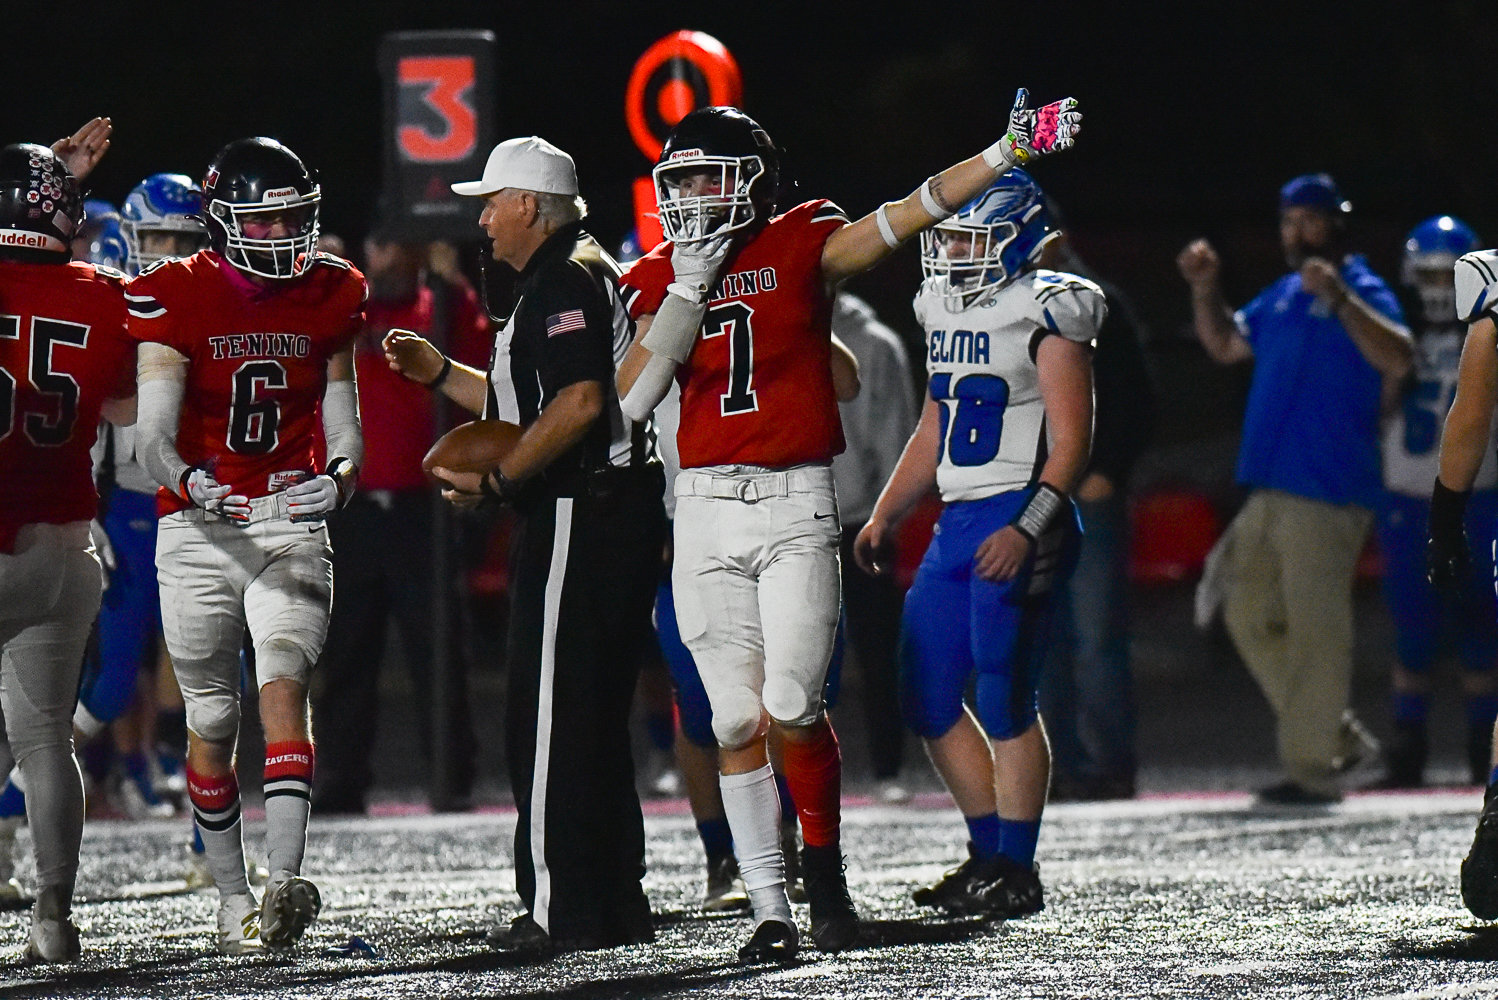 Kysen Knox points which way the ball is headed after Tenino recovered a fumble in the second half of its win over Elma at home on Oct. 14.